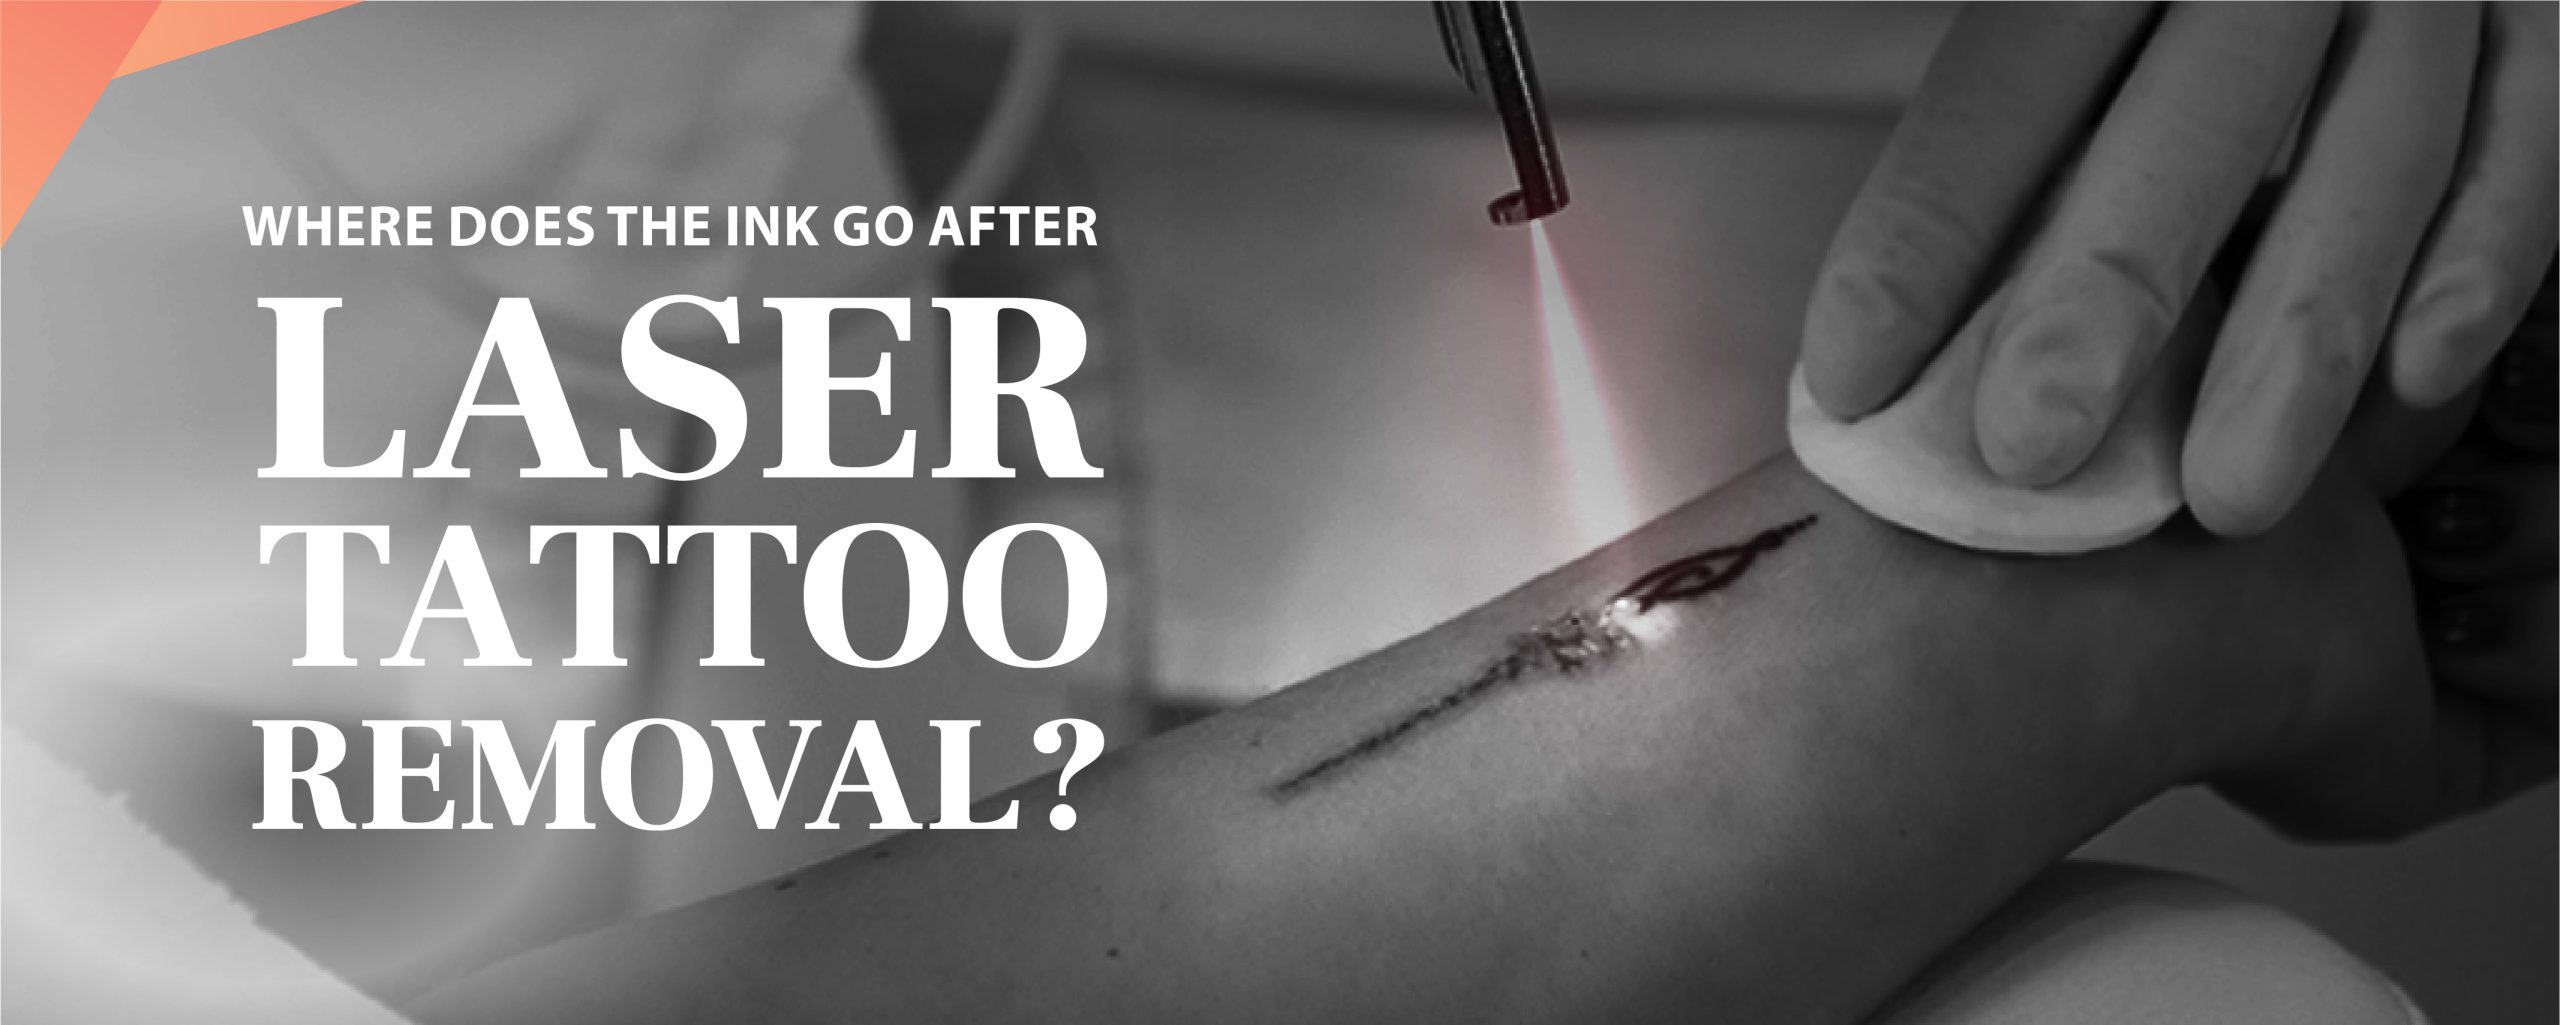 Limited Tattoo Excision | Tattoo Removal Surgery Gainesville Florida